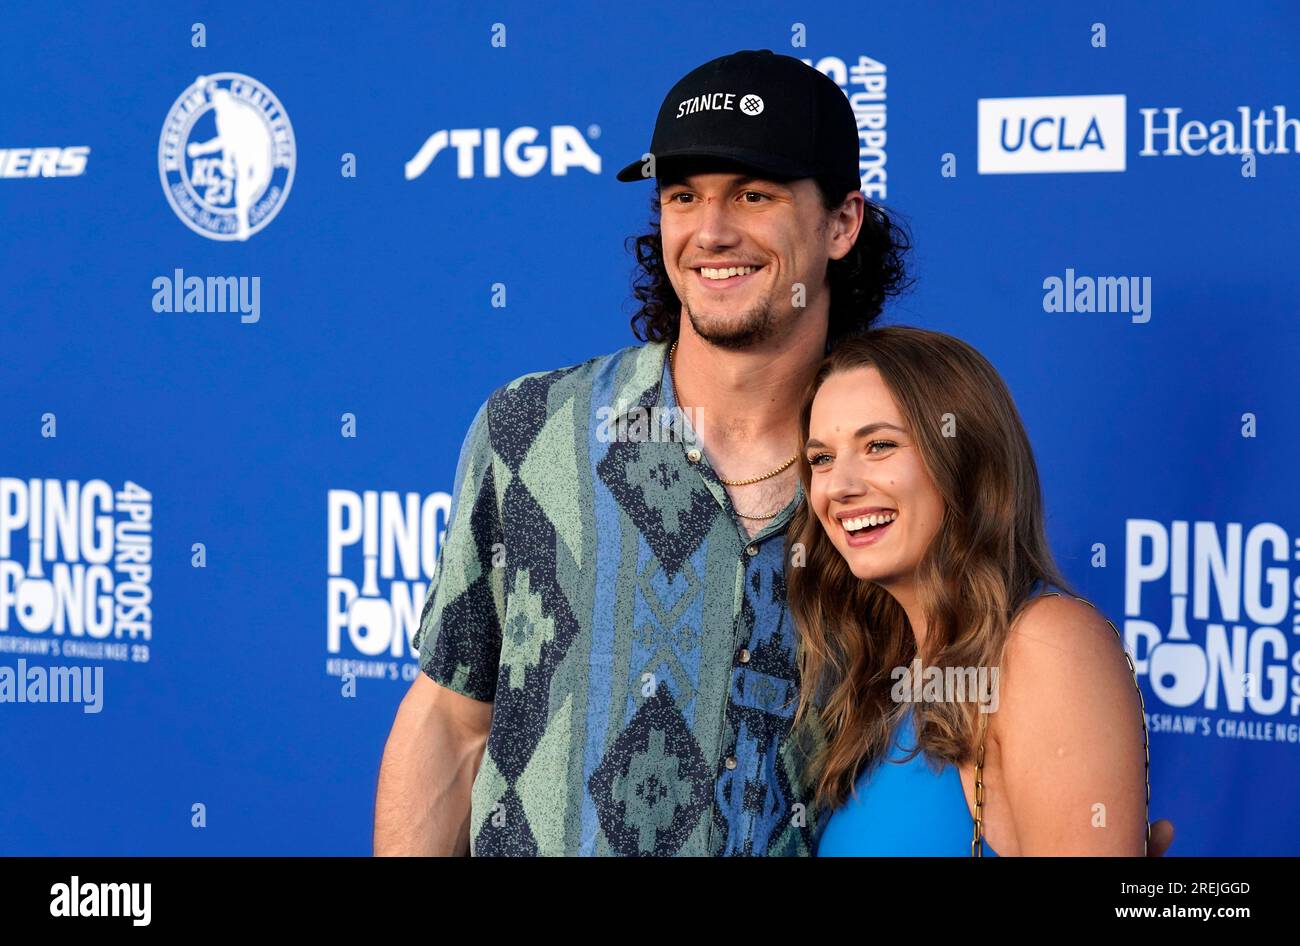 Los Angeles Dodgers baseball player James Outman and his wife